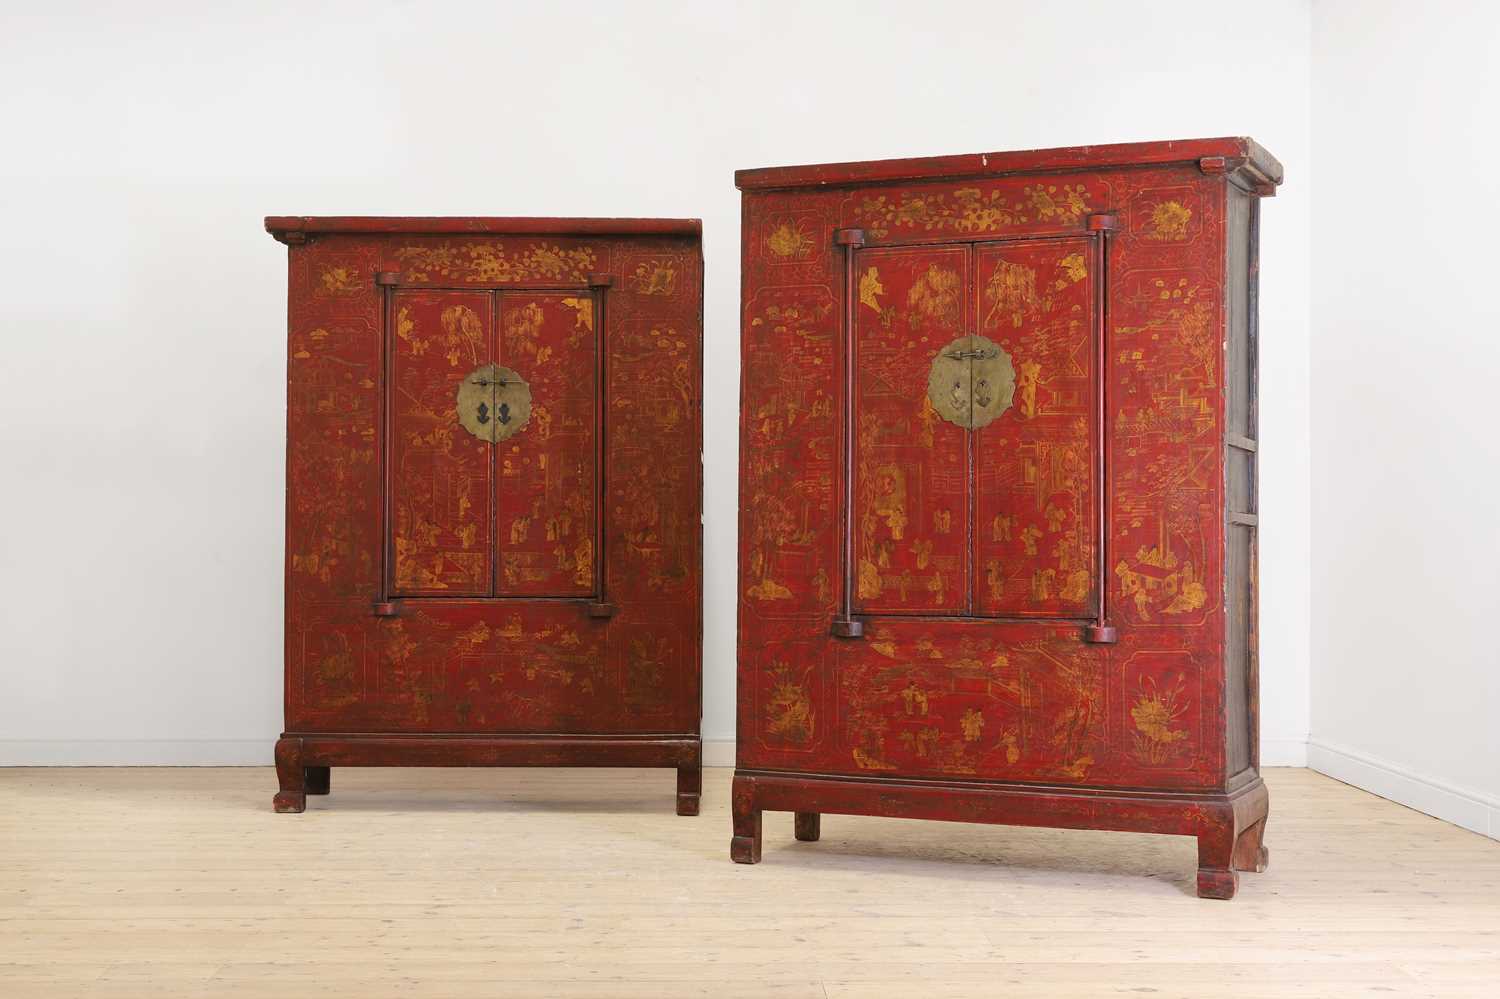 A pair of red-lacquered cabinets,